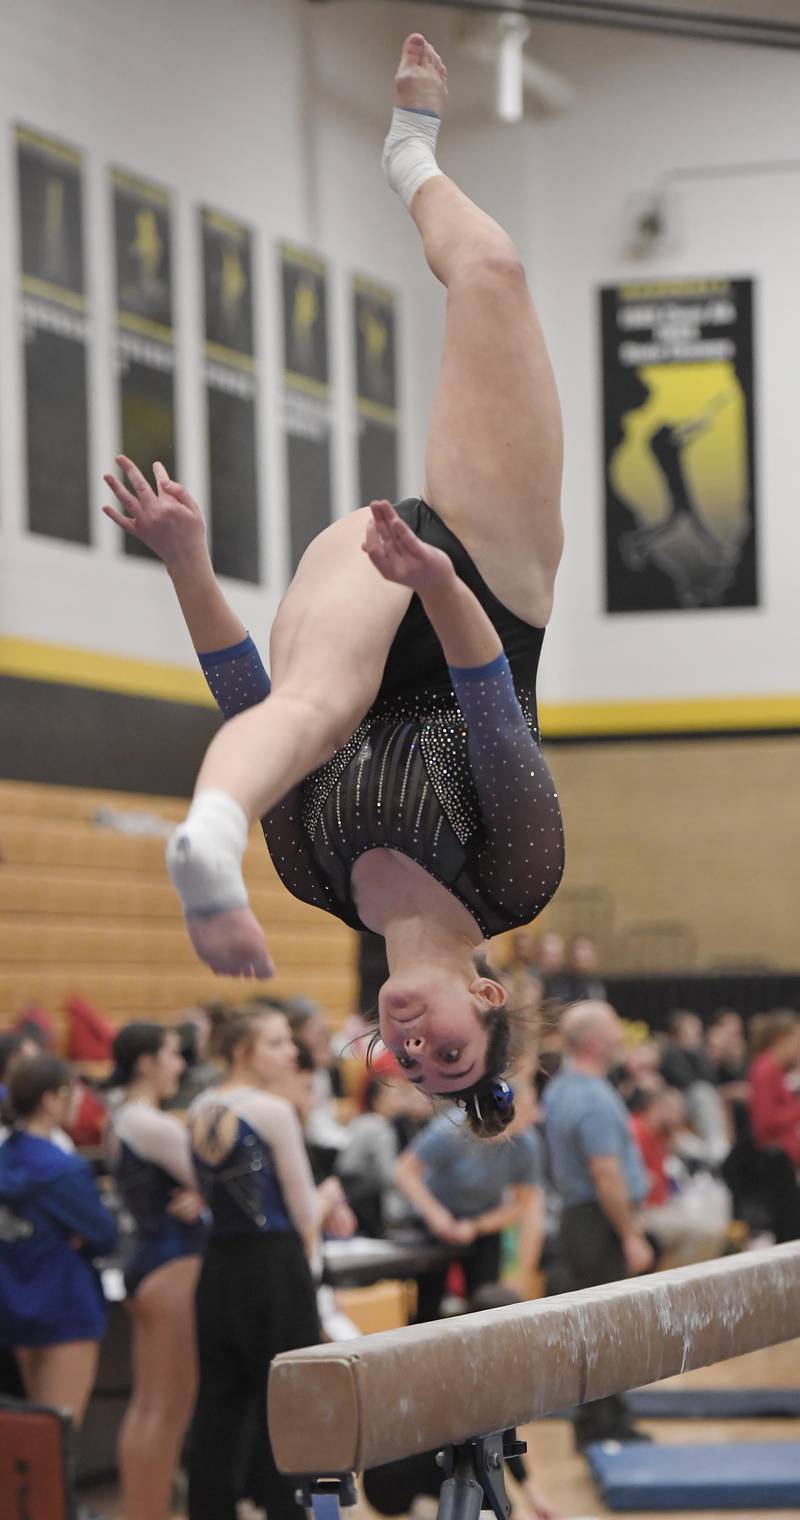 Geneva's Sadie Karlson on the balance beam at the Hinsdale South girls gymnastics sectional meet in Darien on Tuesday, February 7, 2023.